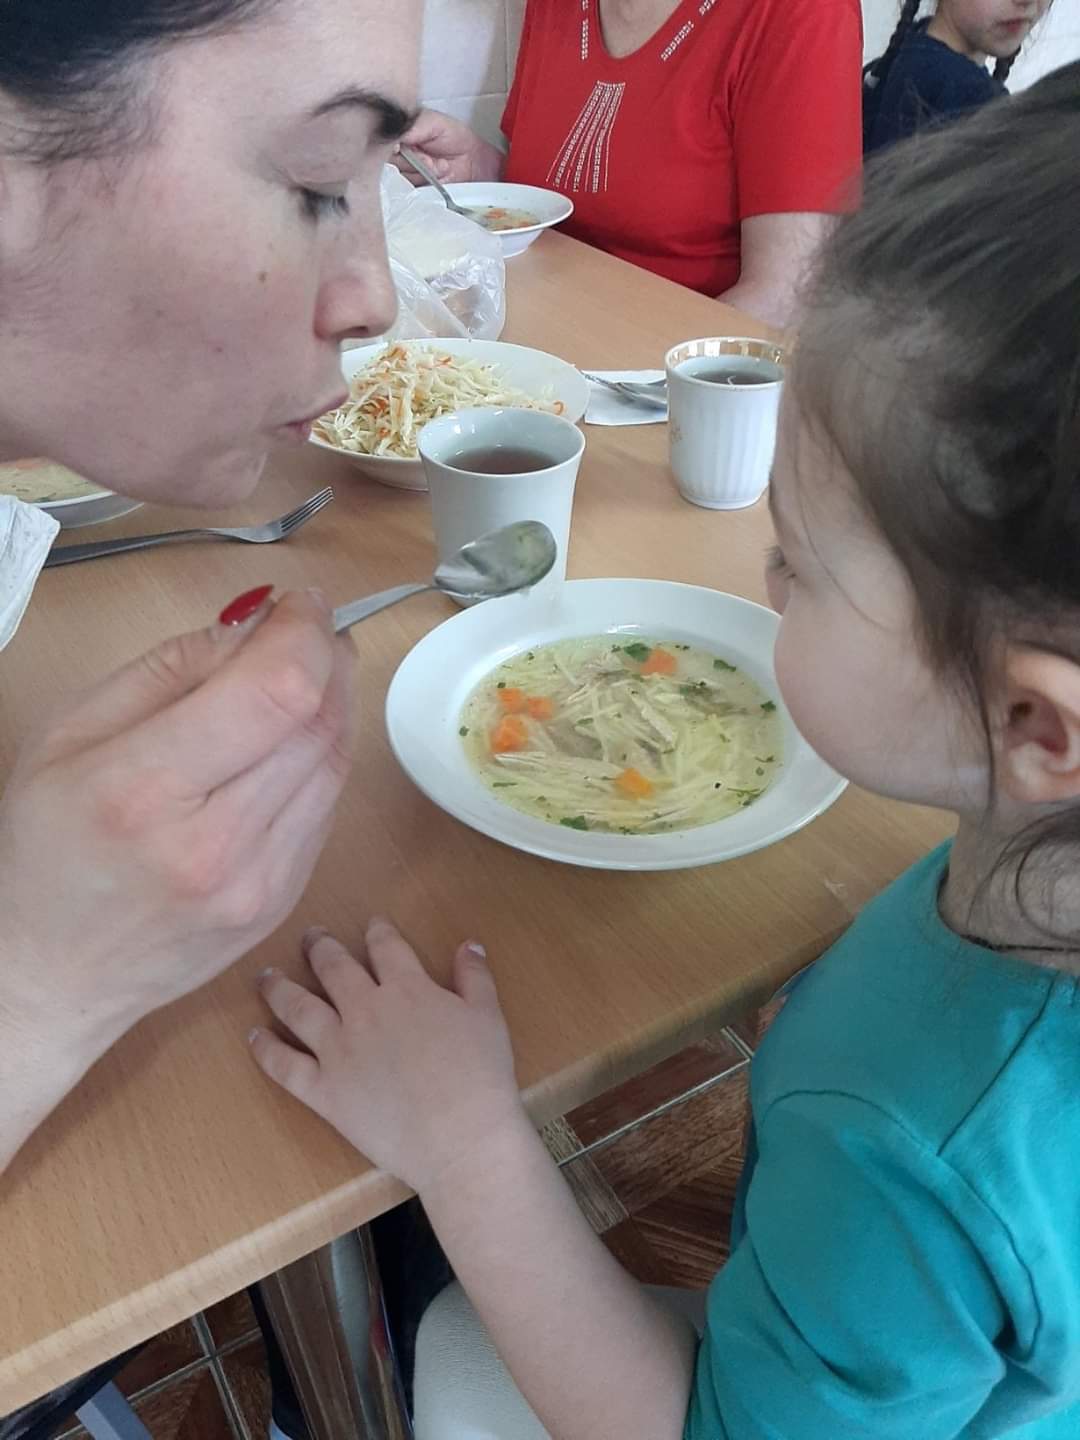 Ukrainian mother and daughter sharing a meal.